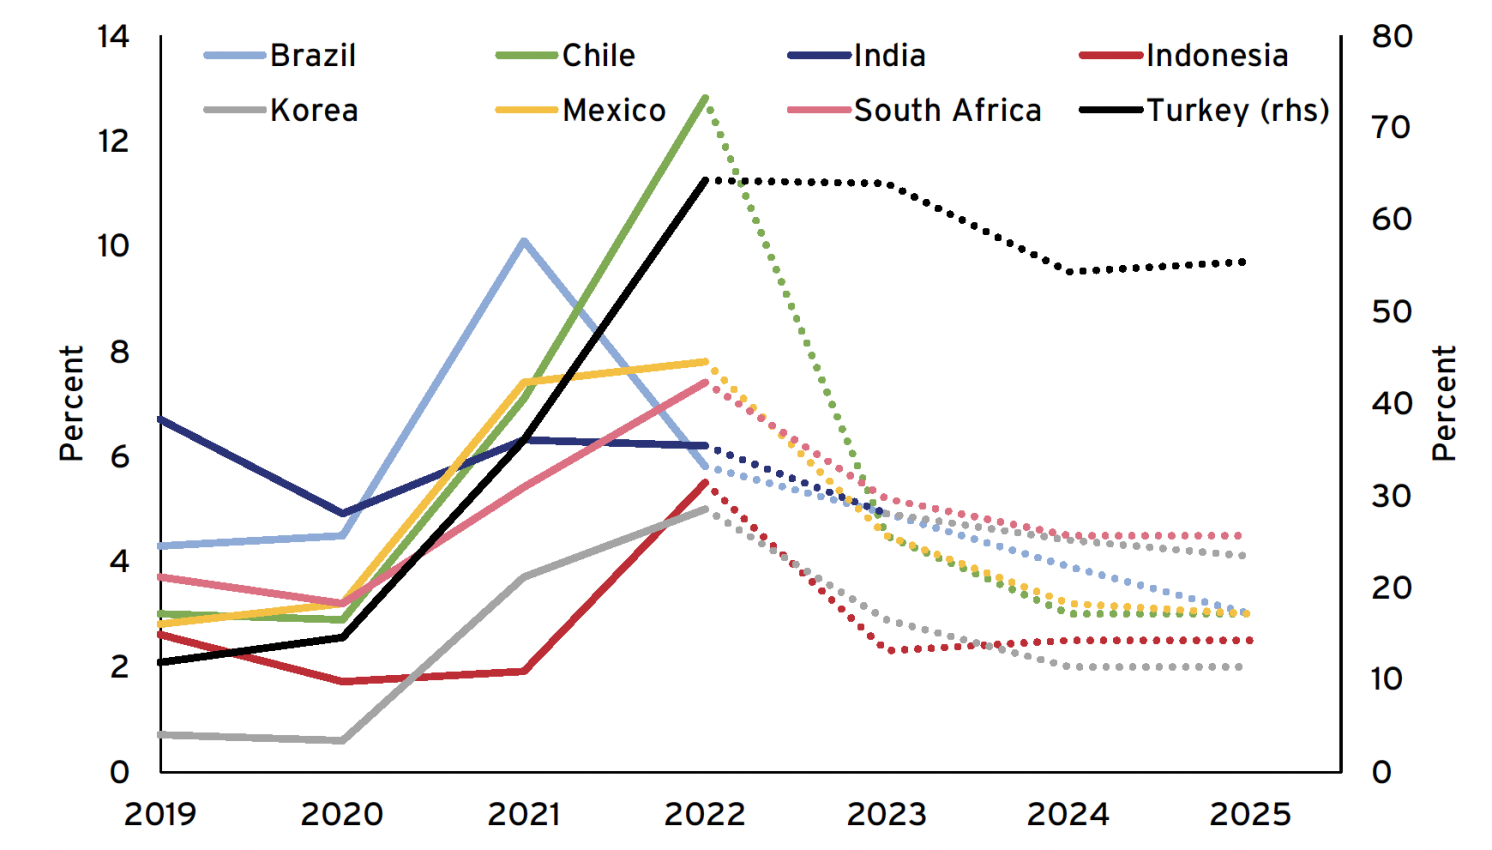 Figure 4b Inflation in emerging markets from 2019 to 2025e